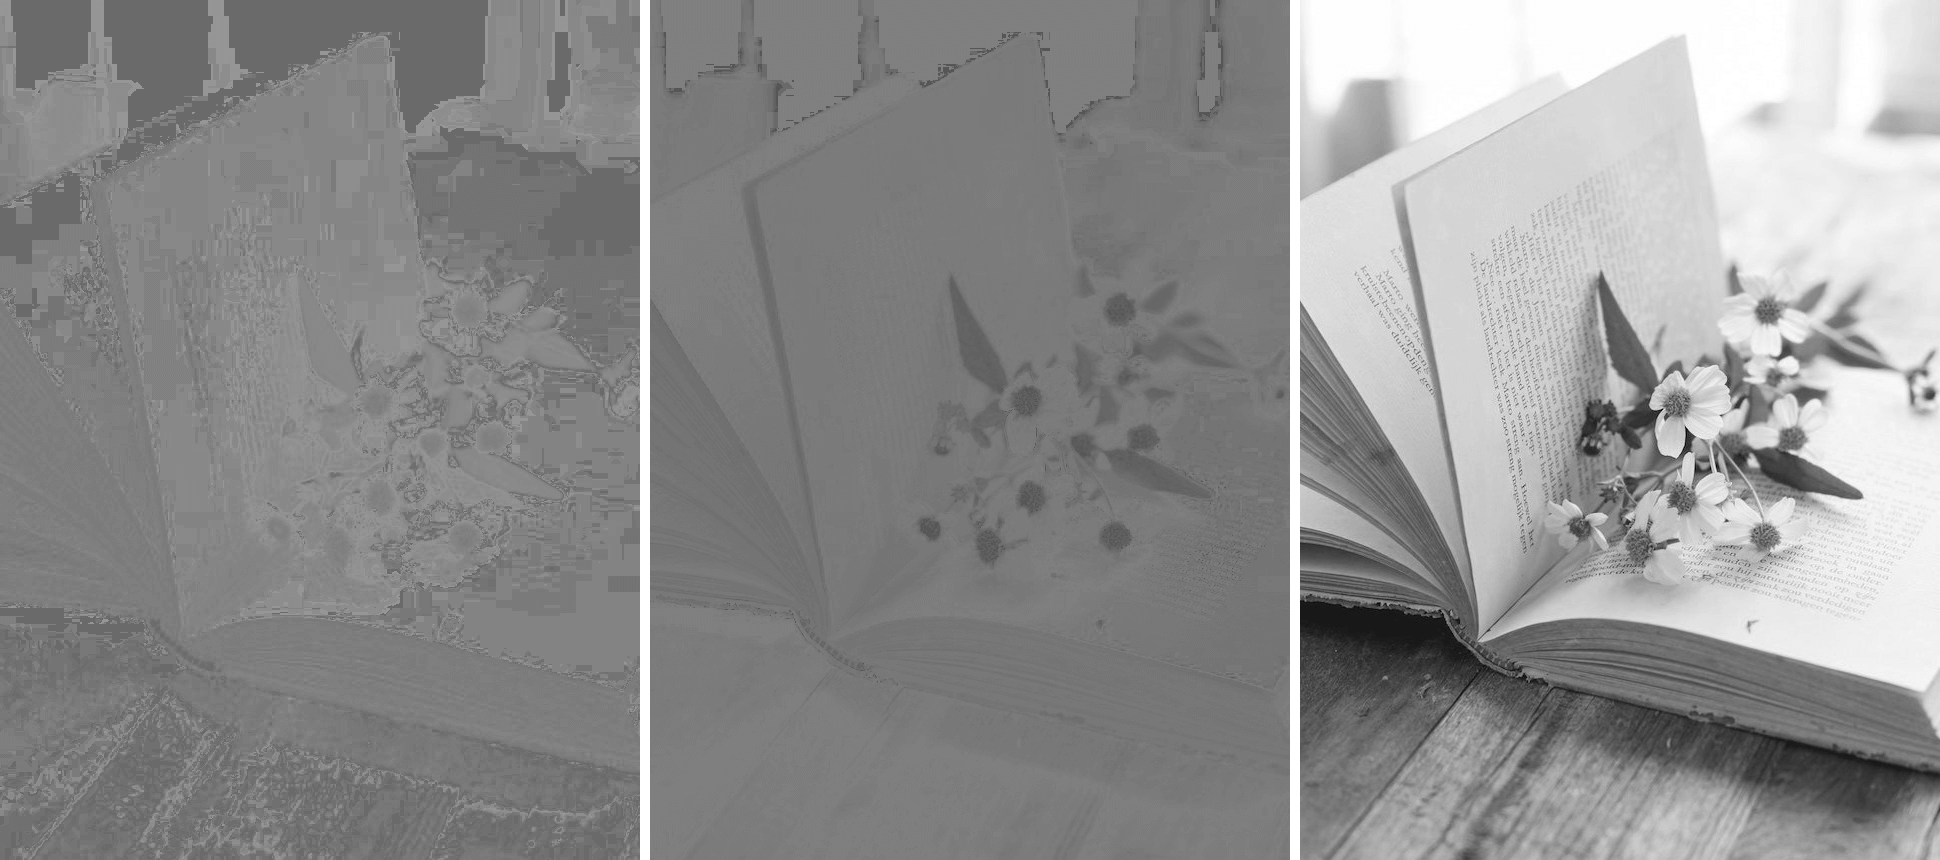 In this example, we separate the hue, saturation, and light channels from an image of book pages decorated with flowers. Then, we convert the resulting channel images into grayscale tones, allowing us to analyze the images based on their light and dark areas. (Source: Pexels.)